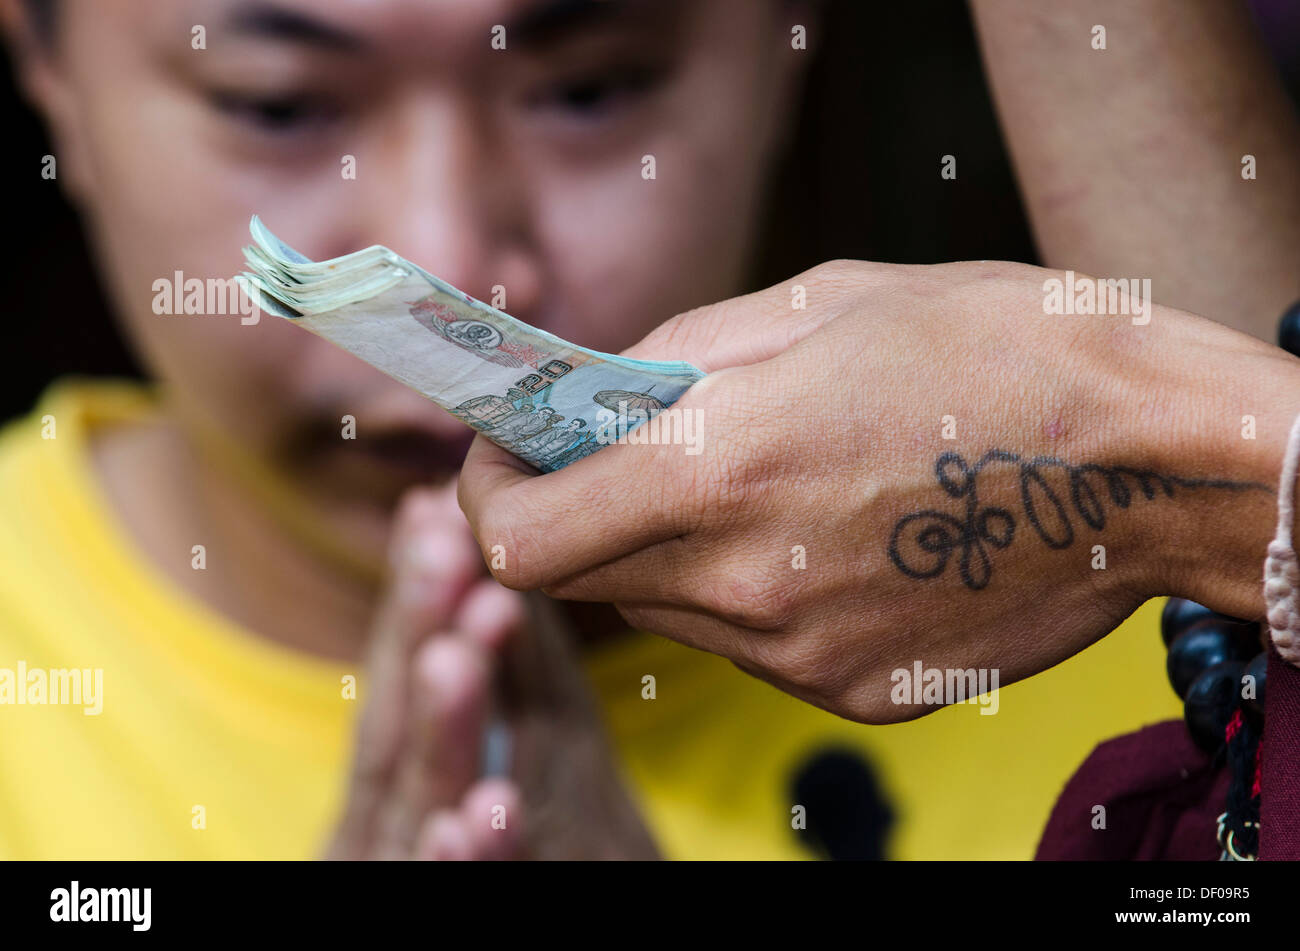 Charm sale, man making the traditional gesture of greeting and showing of respect, Wai, tattooed hand holding banknotes, Temple Stock Photo